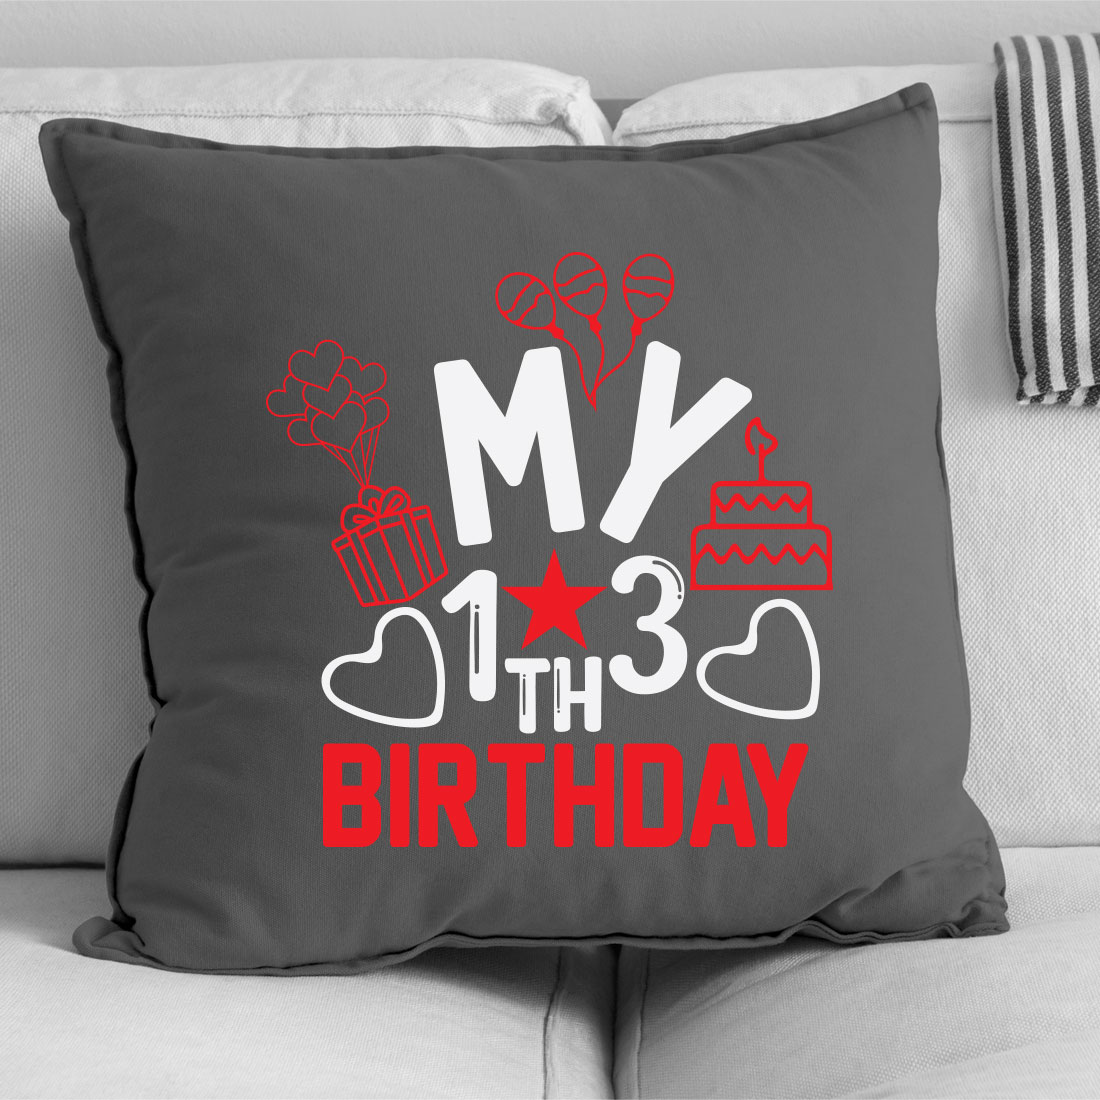 Pillow with a birthday message on it.